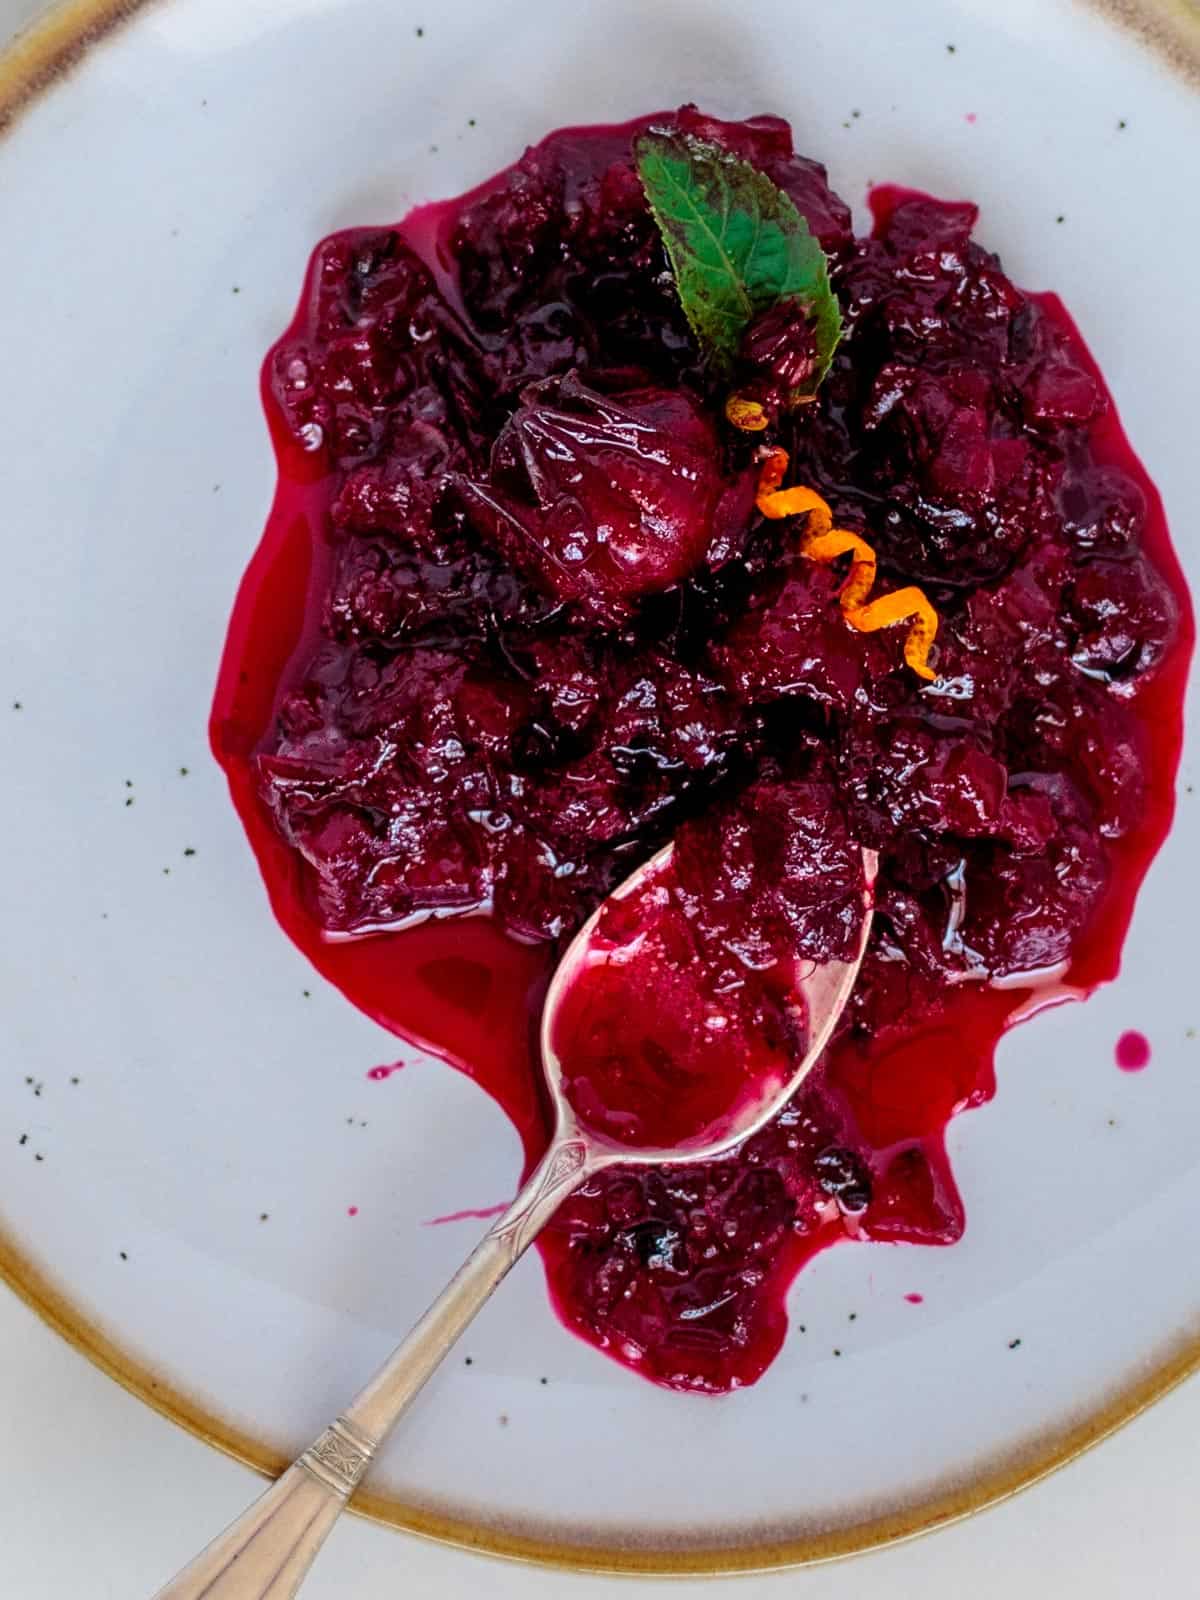 Juicy thick cranberry sauce made from the Jamaican sorrel plant on a spoon.